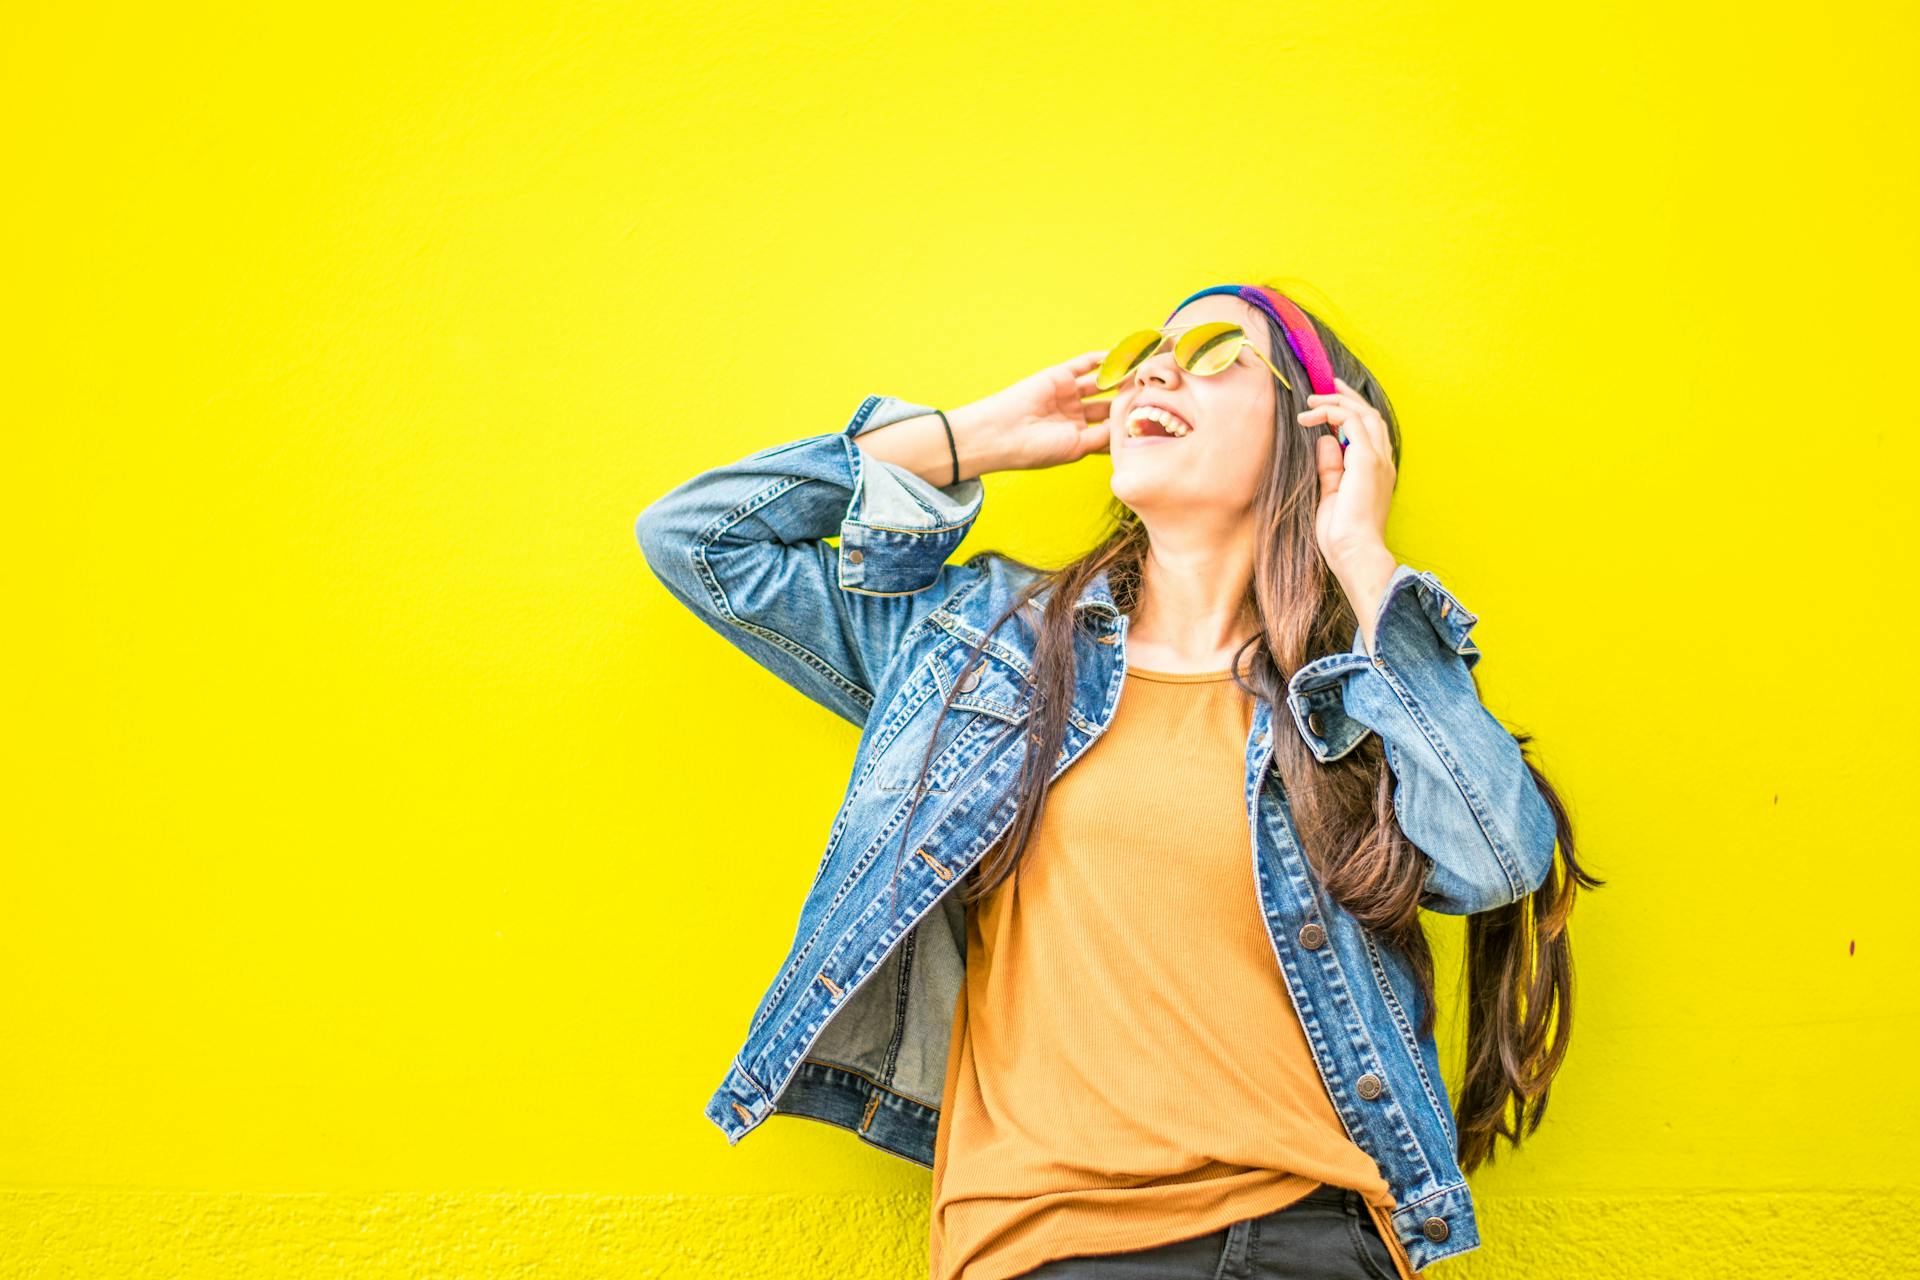 A smiling woman looking up while standing against a yellow wall | Source: Pexels